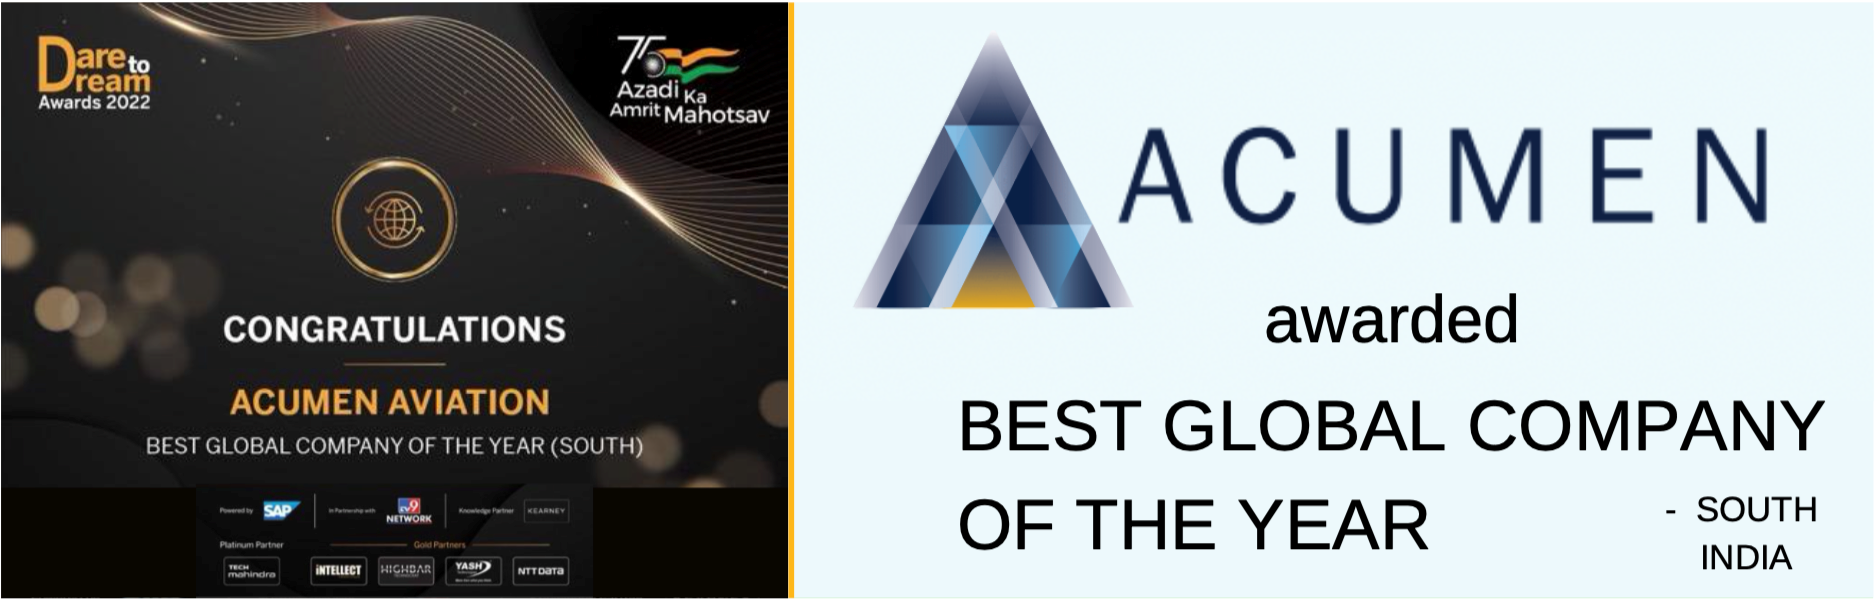 Acumen Aviation Wins Best Global Company Of The Year Award 